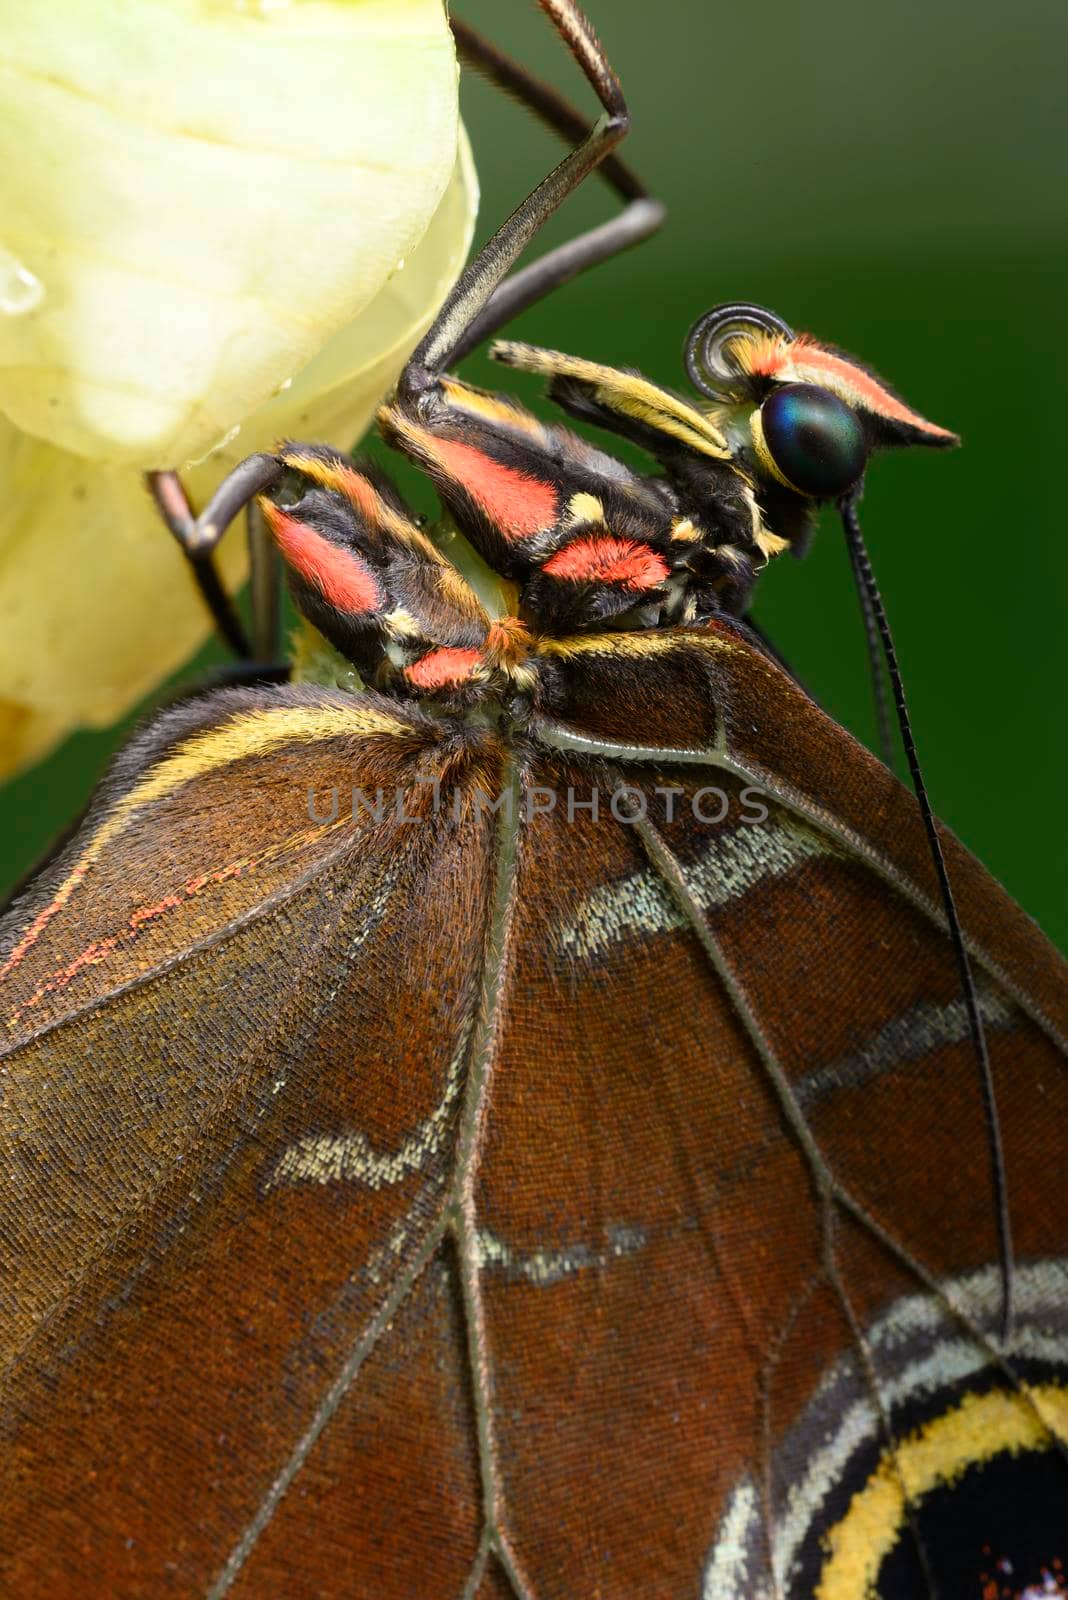 Close up of tropical Morpho butterfly coming out of chrysalis